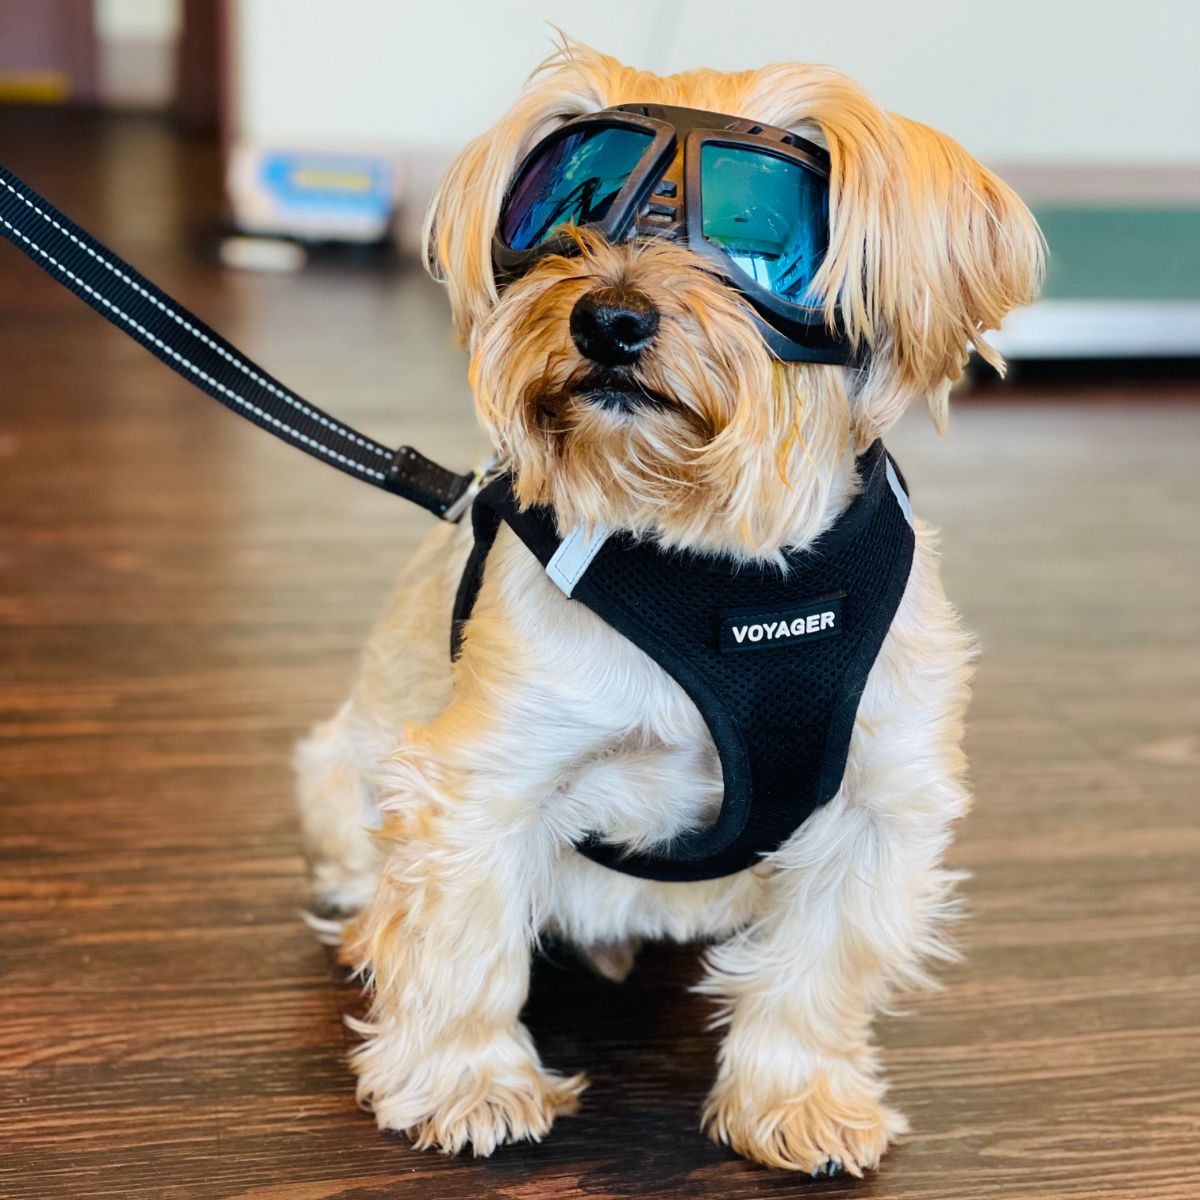 a dog wearing goggles and harness